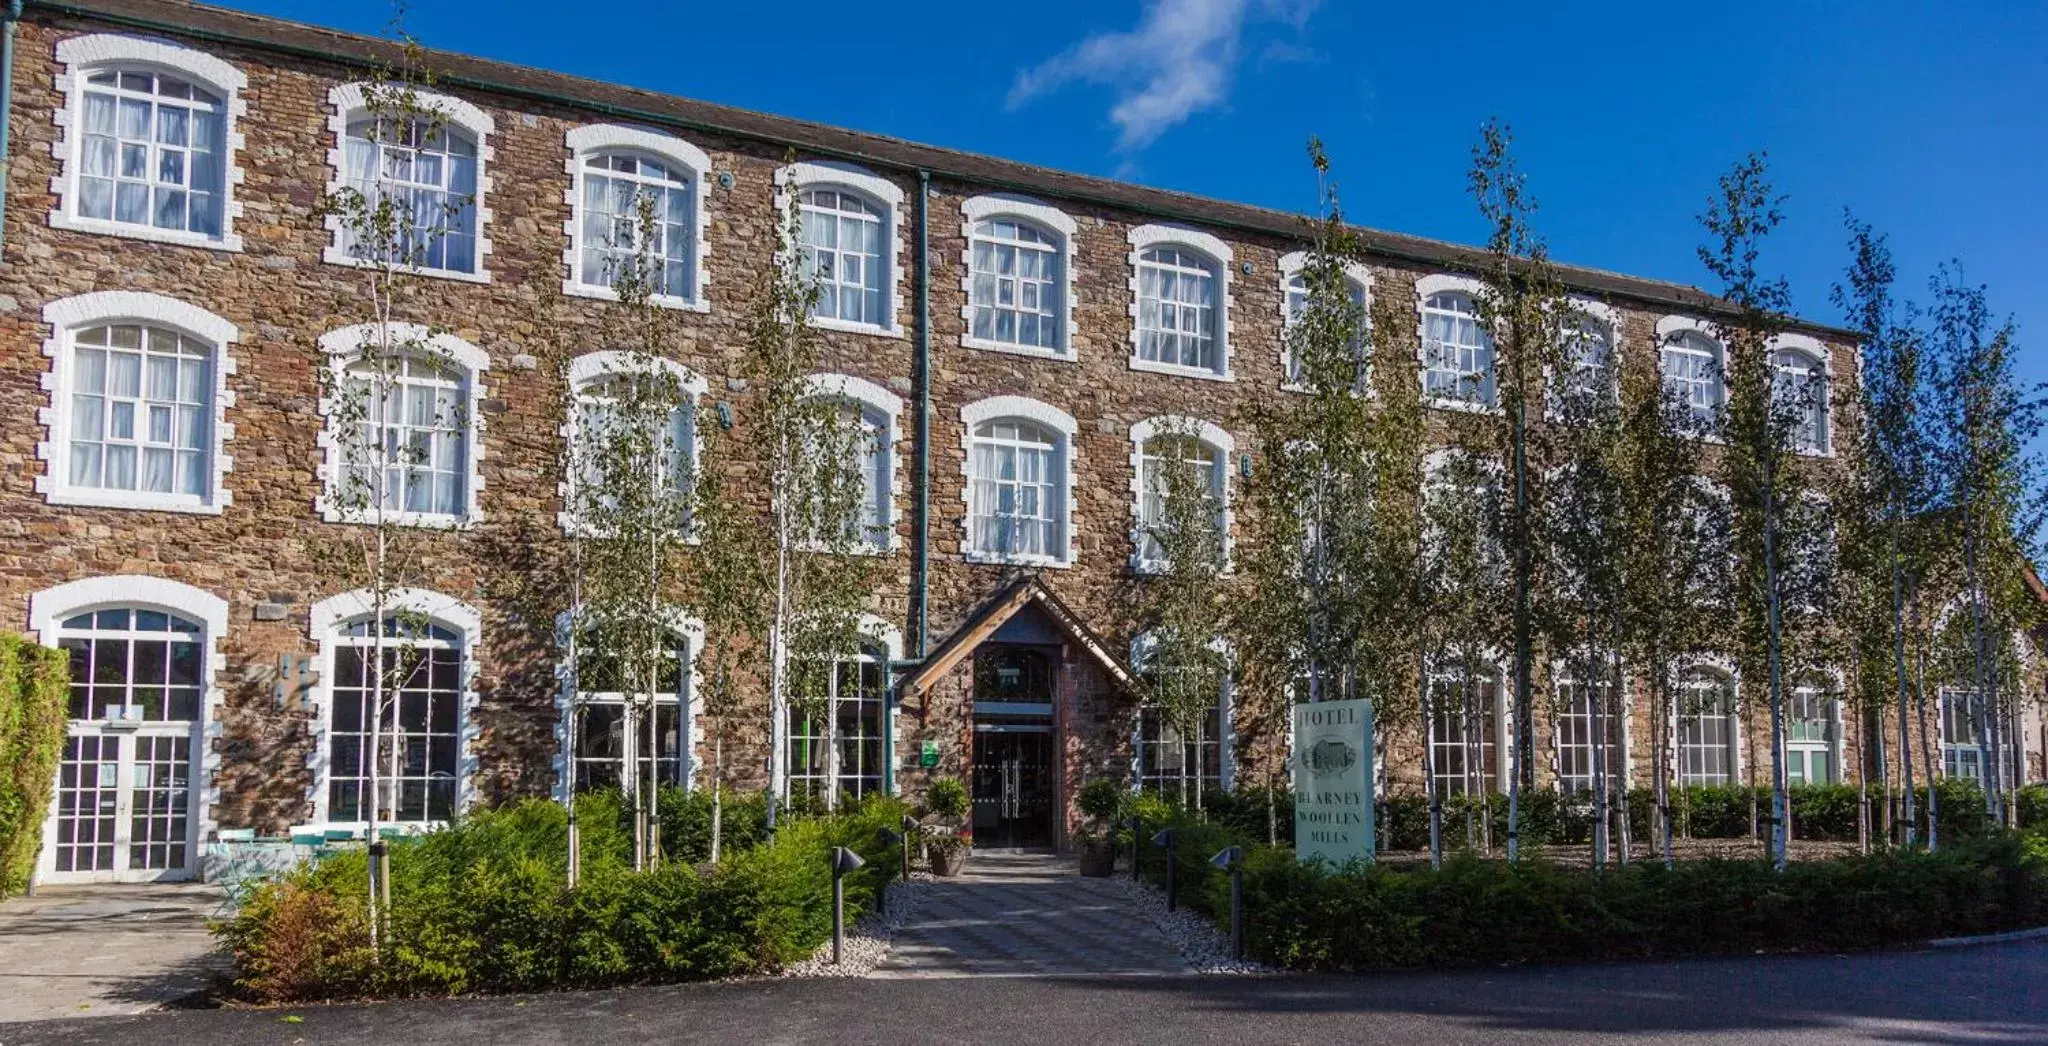 Property building in Blarney Woollen Mills Hotel - BW Signature Collection